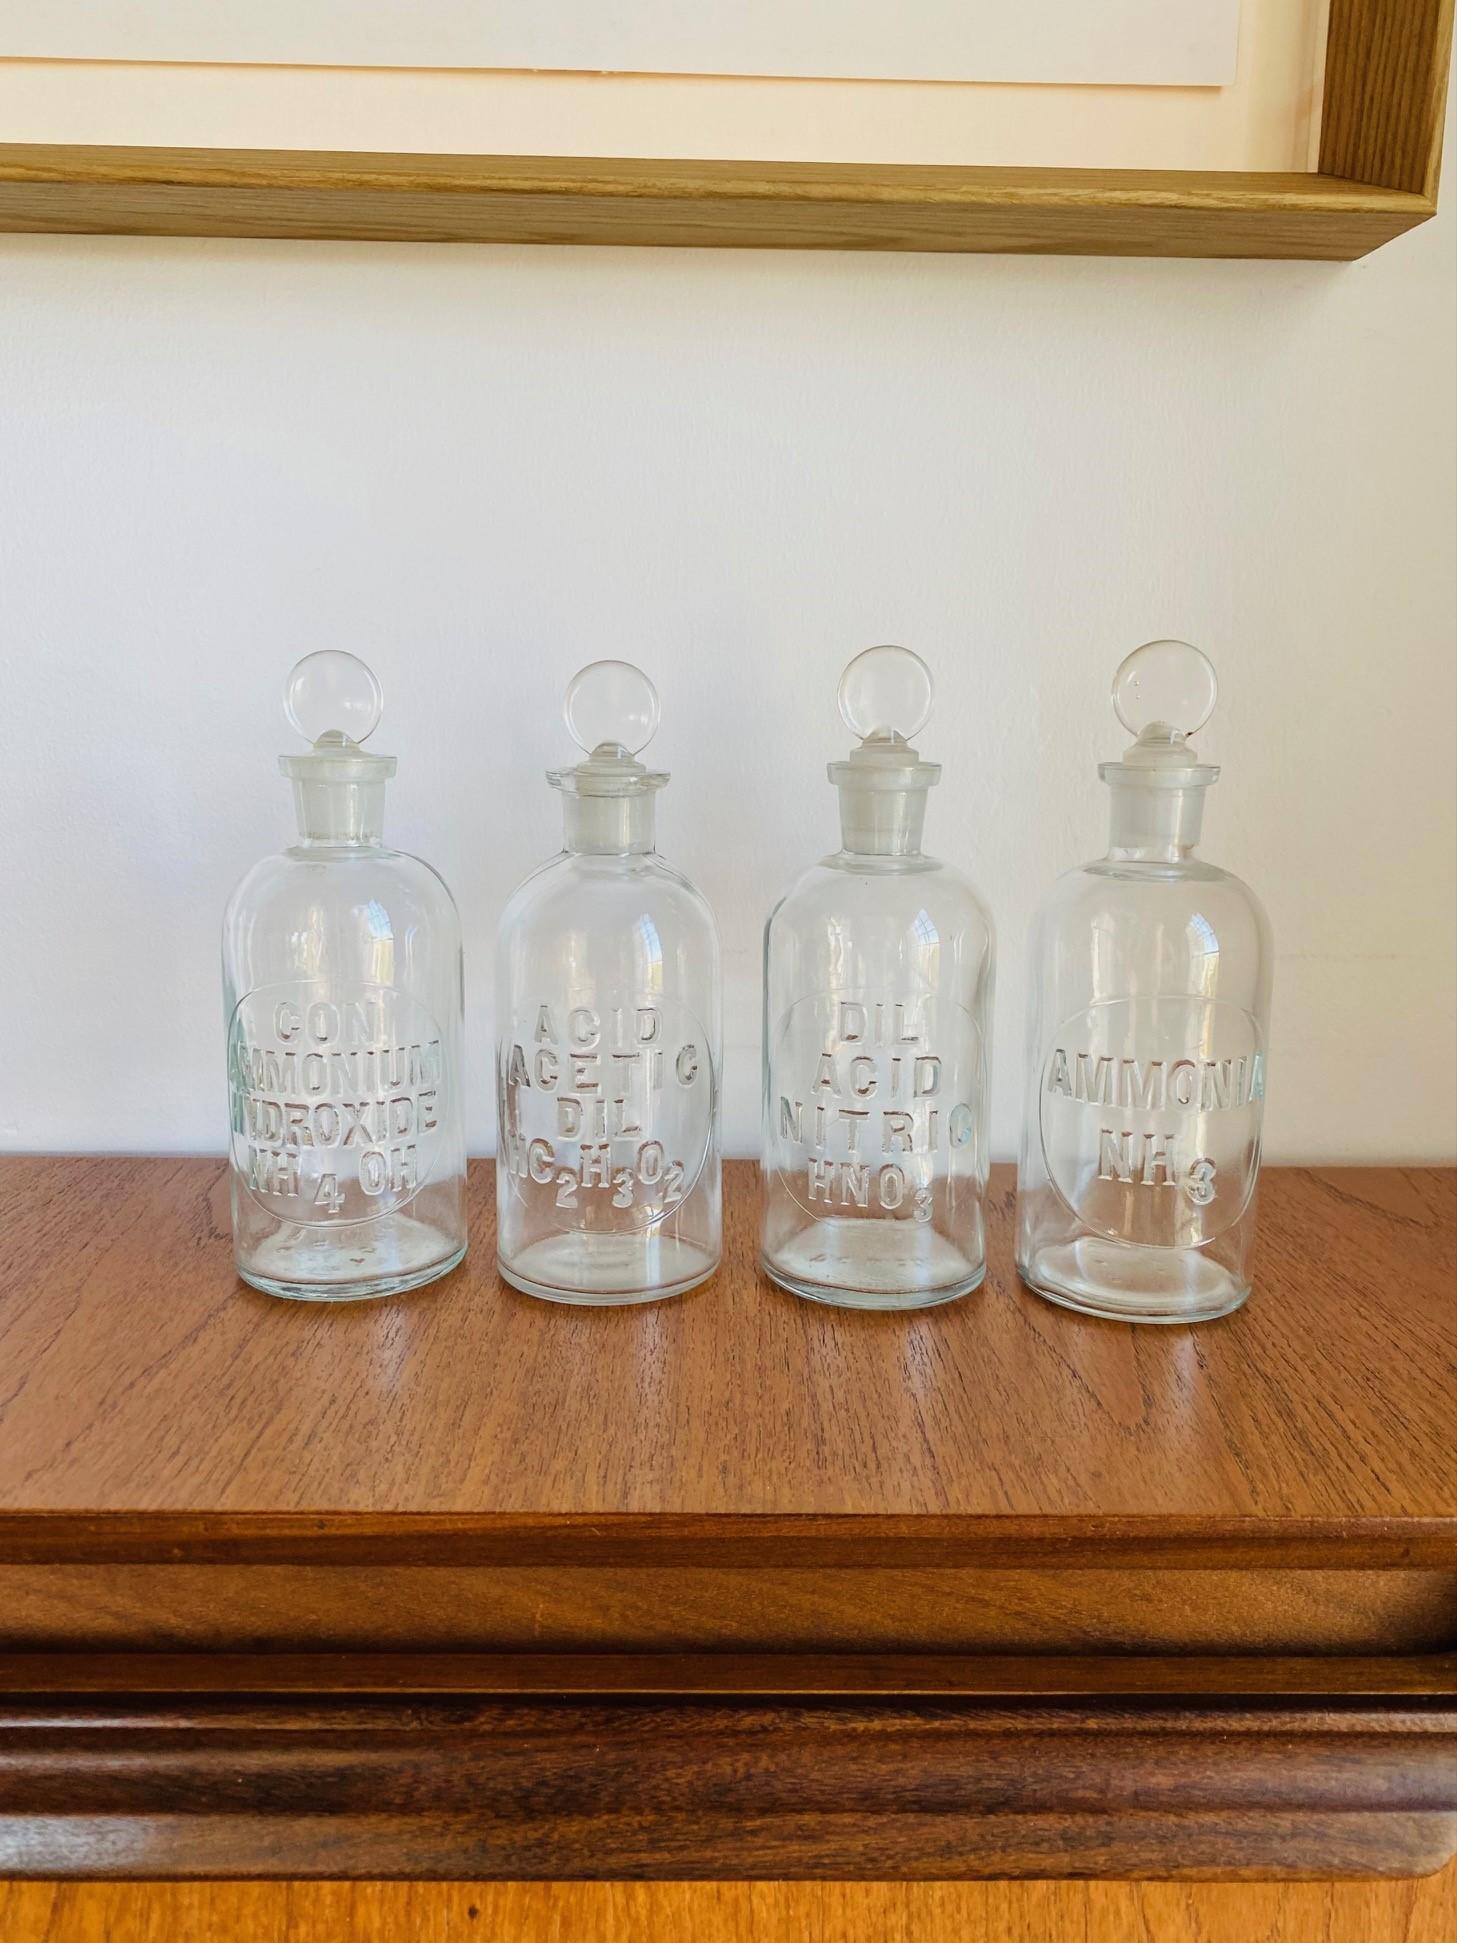 Beautiful set of 4 vintage apothecary bottles with stoppers and embossed.  Classic and unique, these beautiful bottles sparkle in vintage glass with beauty and form.  The classic bottle and stopper shape add a uniform beauty and makes these pieces